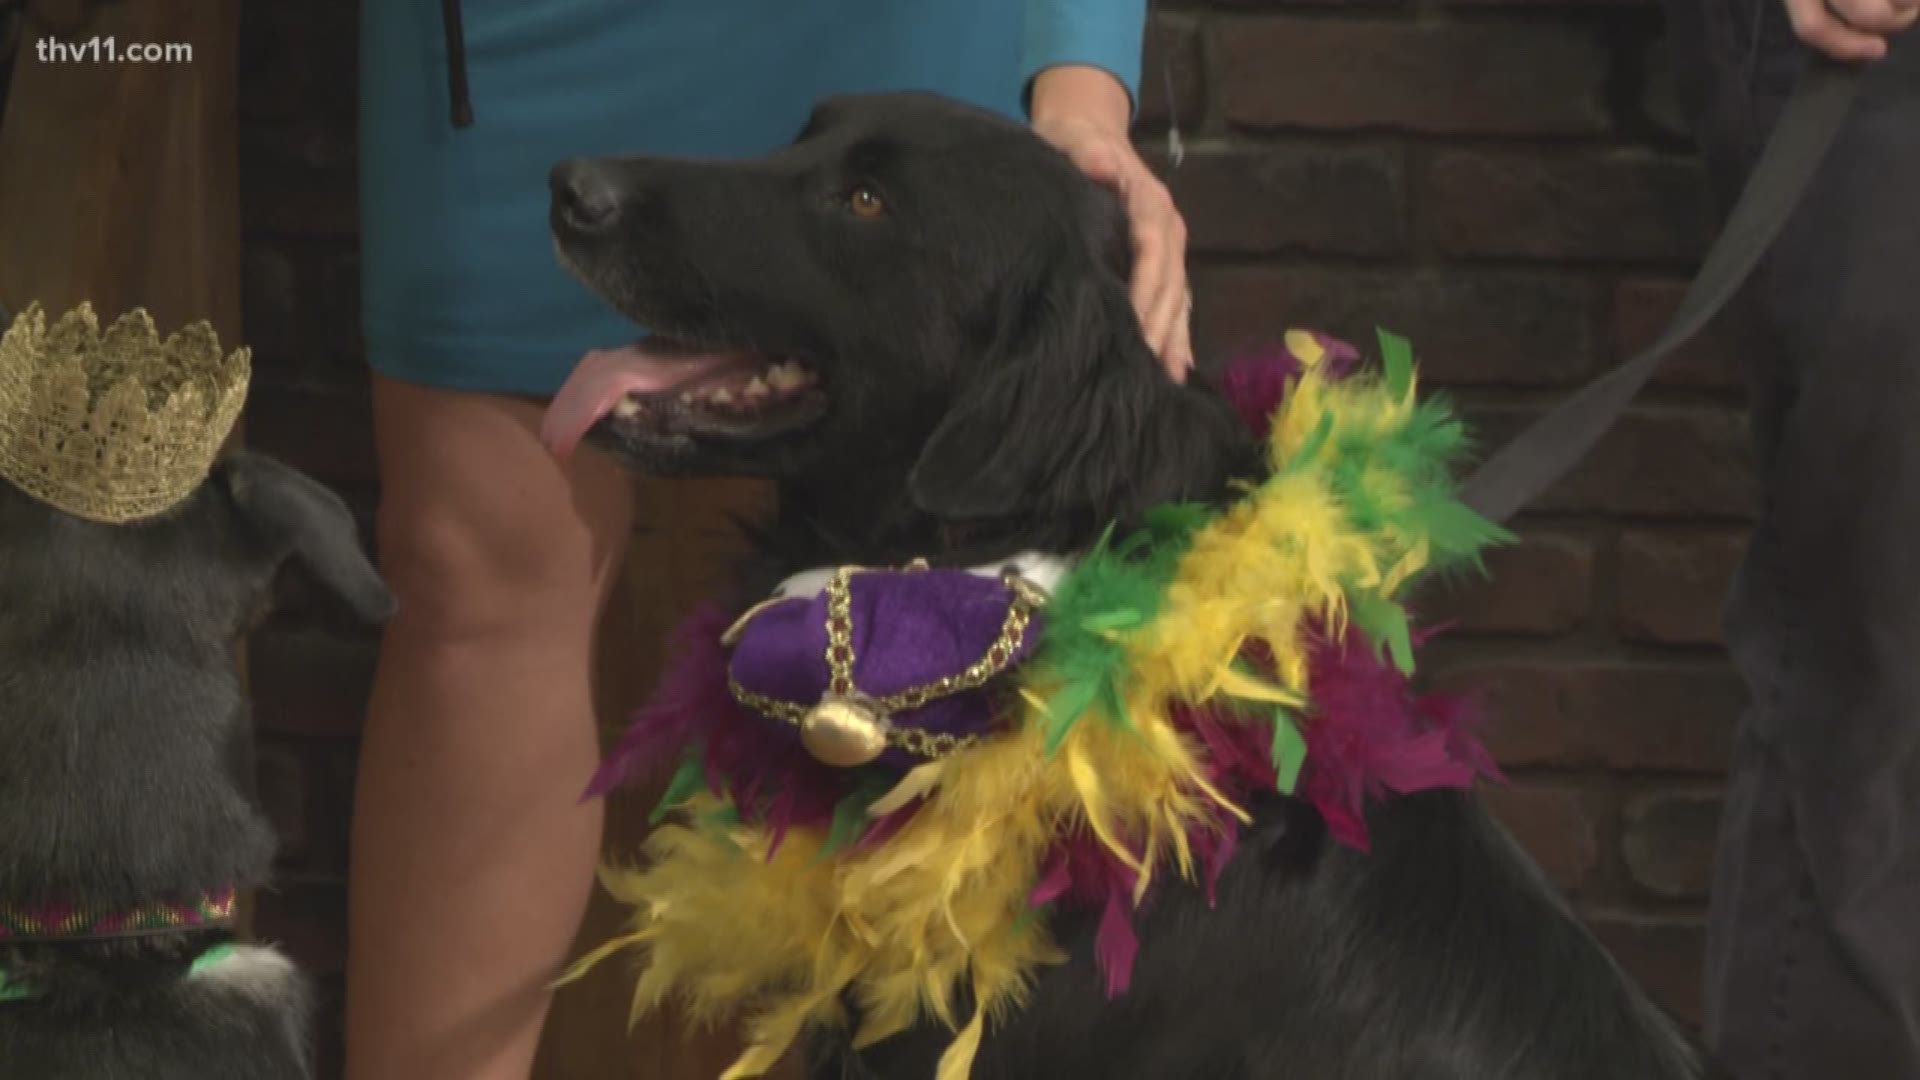 Dogs, beads, costumes and a parade... what more could you want? Little Rock's annual Barkus on Main event happens this Sunday